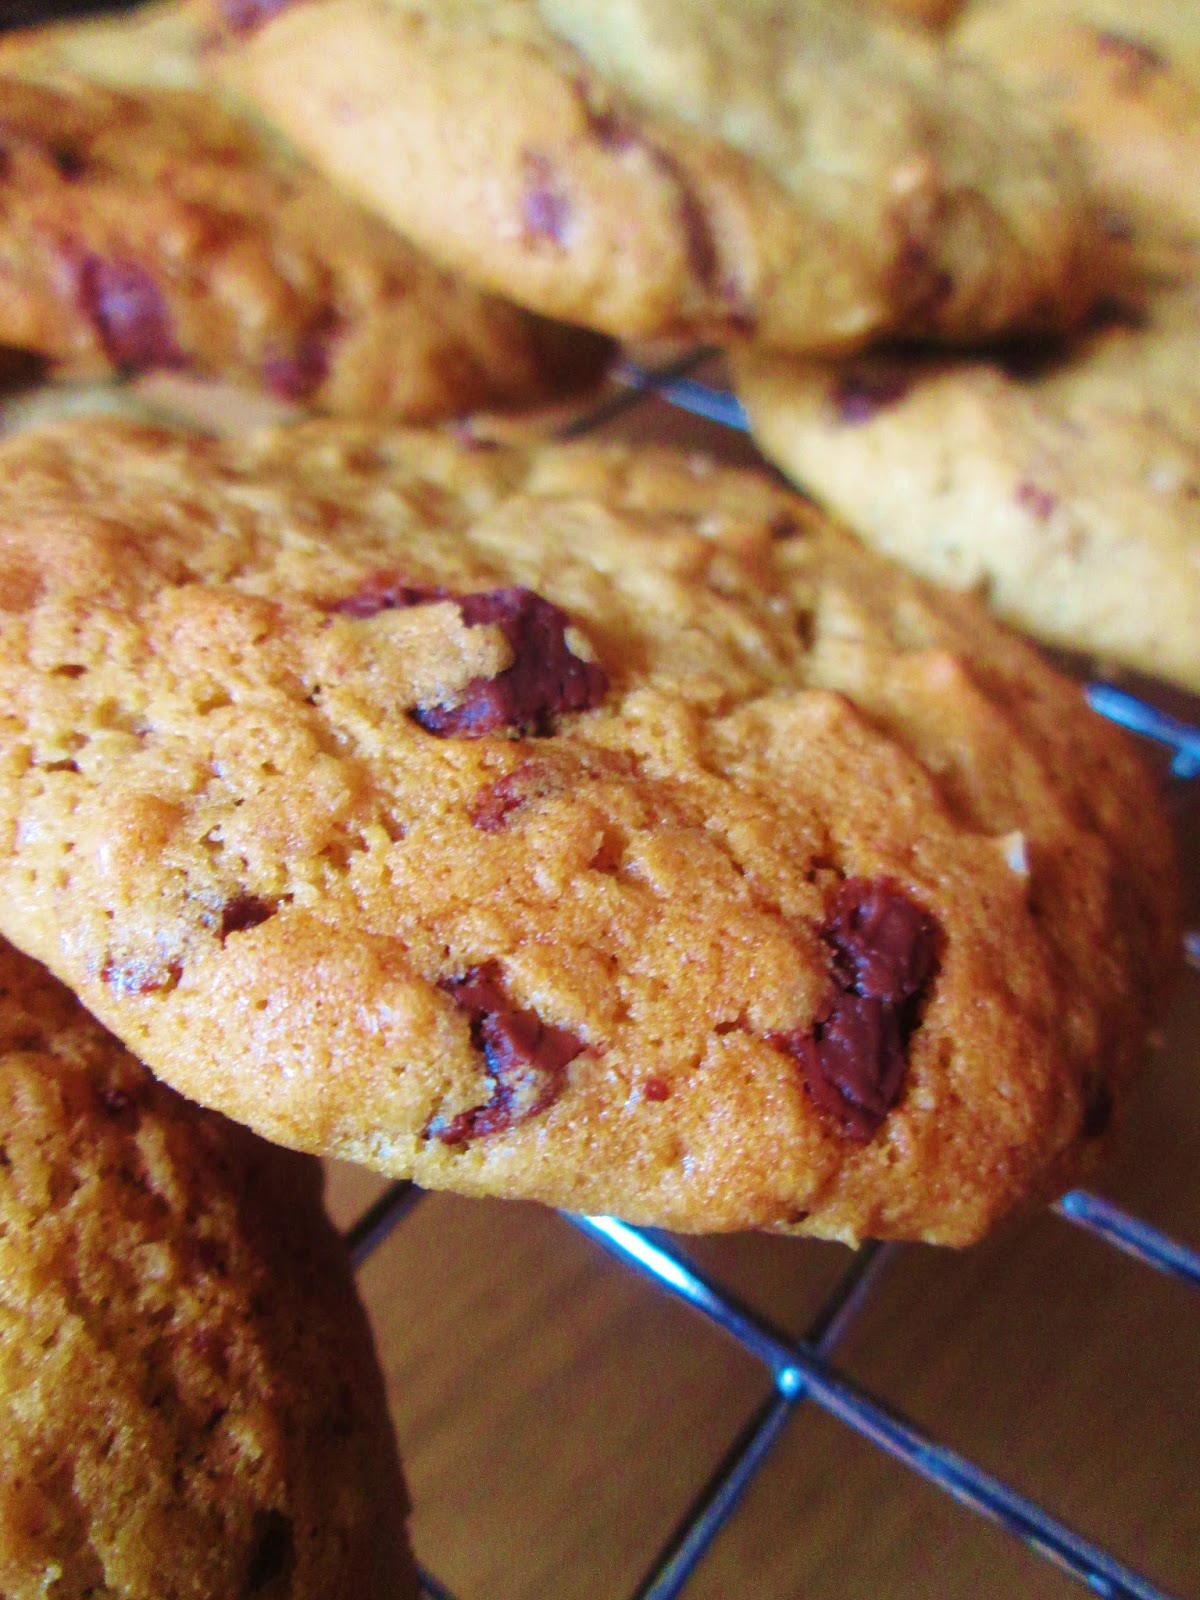 http://themessykitchenuk.blogspot.co.uk/2014/06/reduced-fat-chocolate-chip-cookies.html